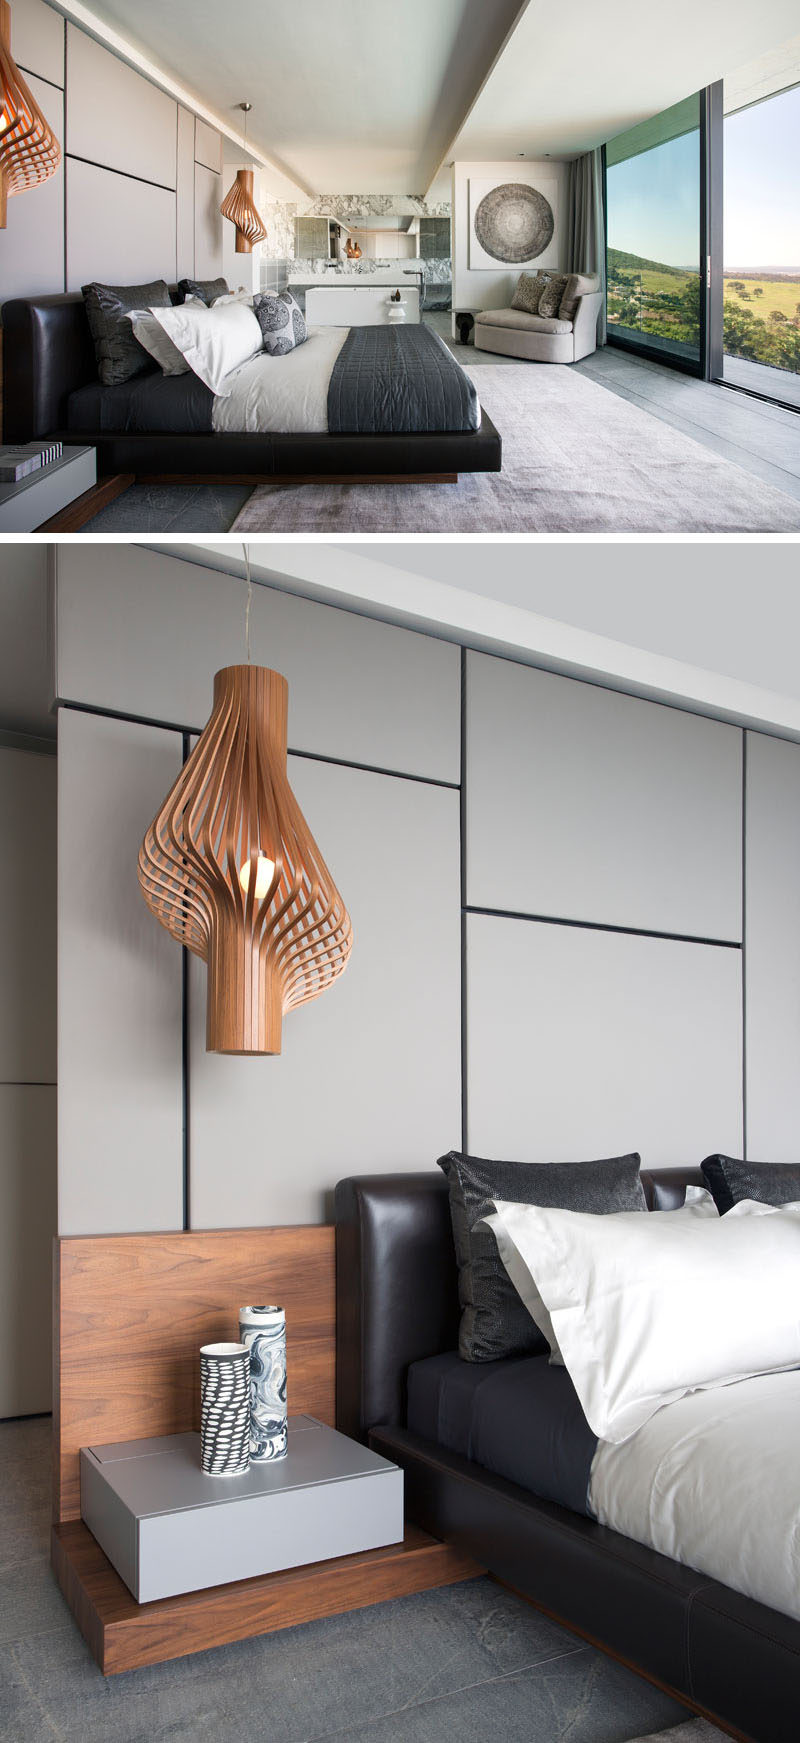 In this modern master bedroom, sculptural wood pendant lights act as bedside lamps, while the bathroom is completely open to the bedroom.